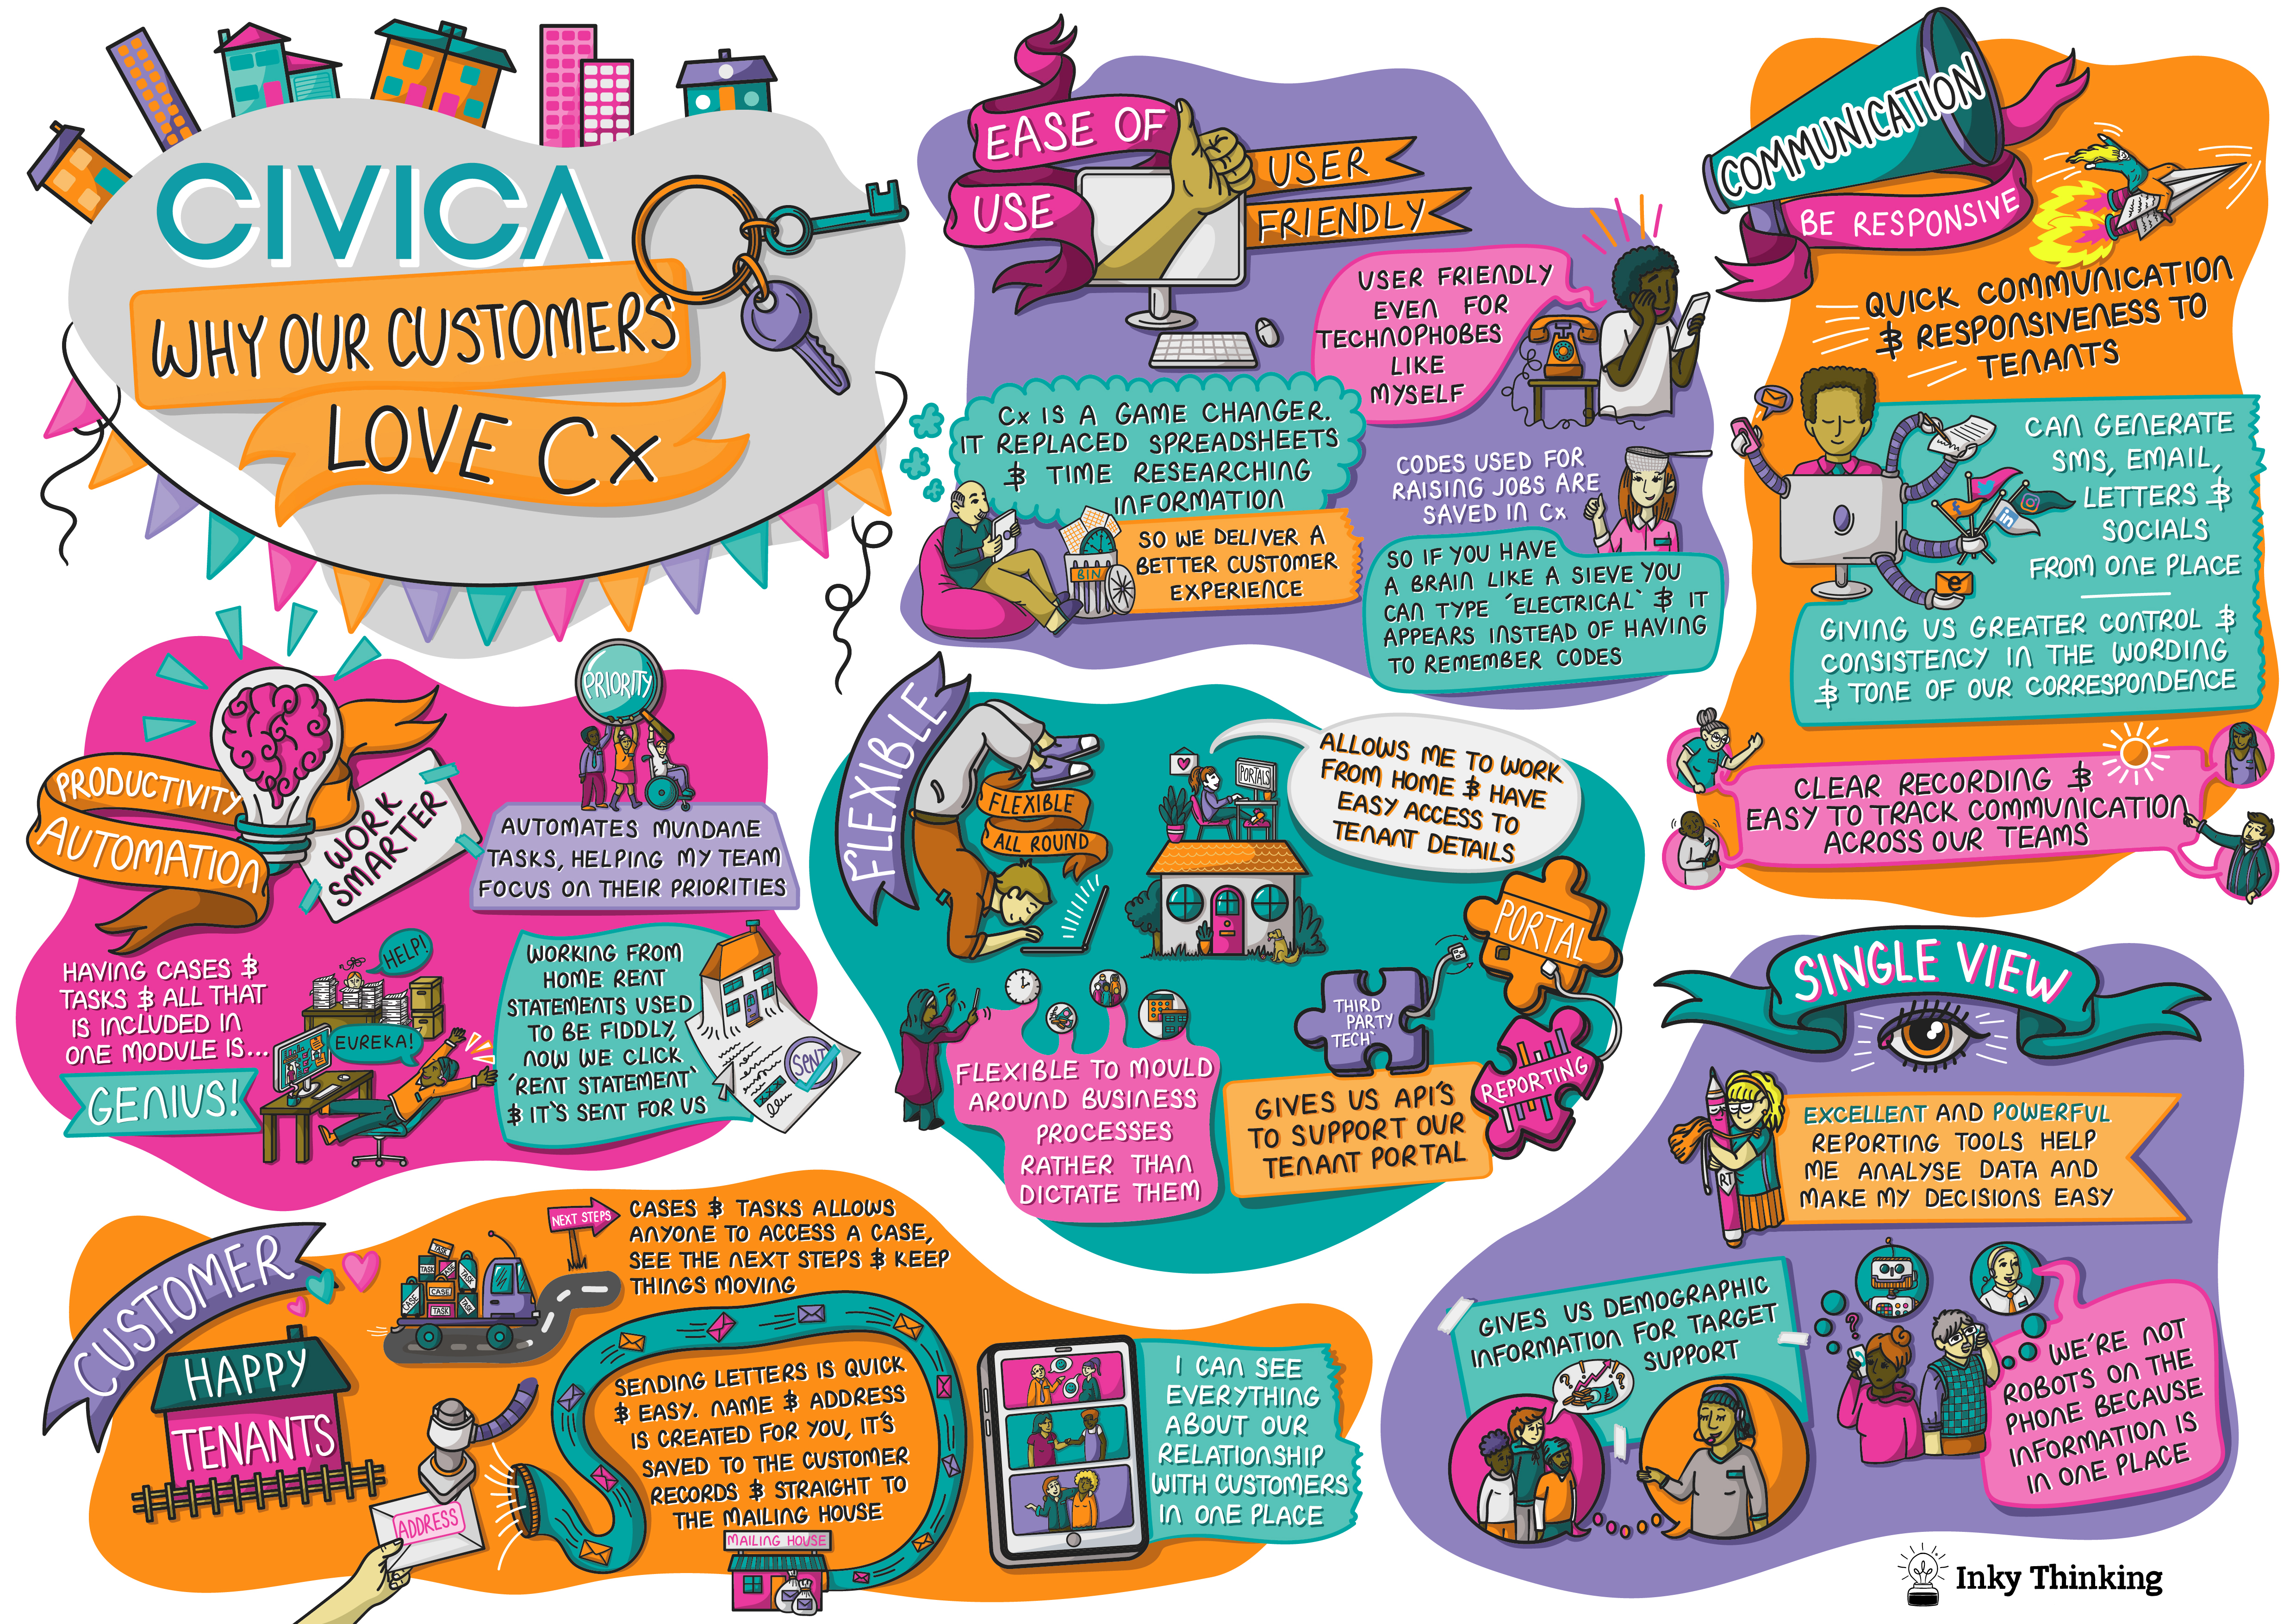 Civica - why our customers love cx graphic